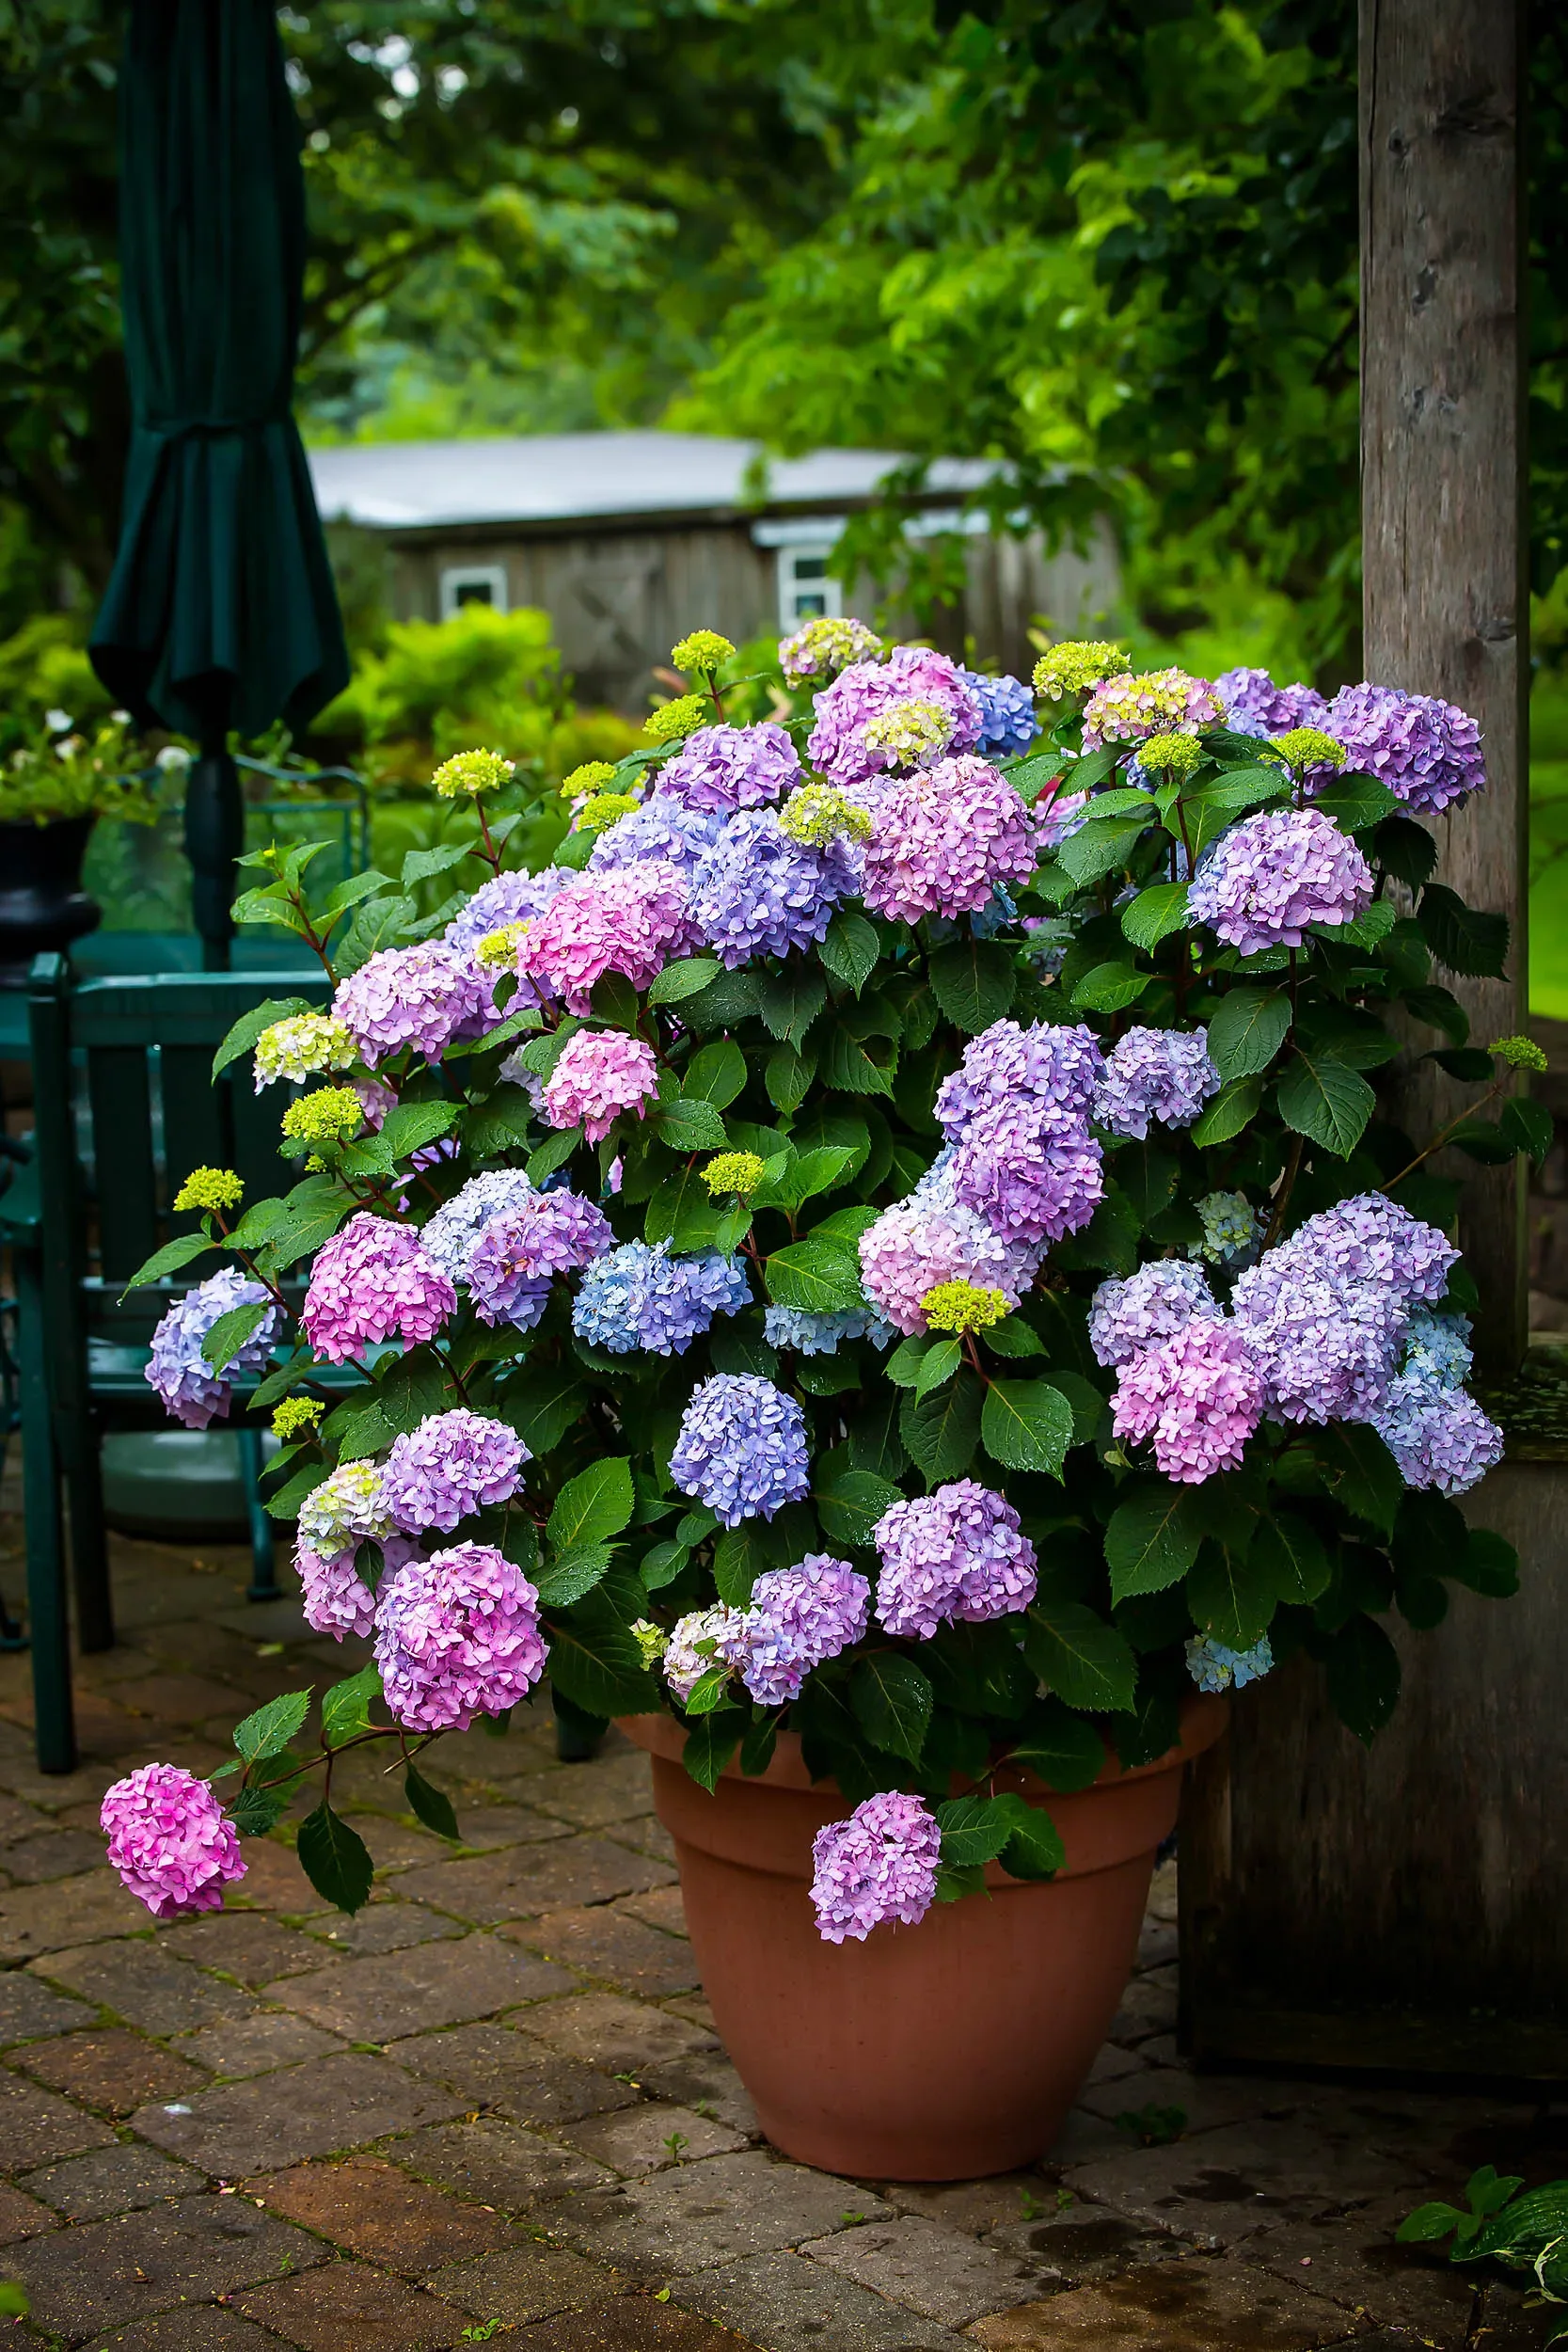 Image of Endless Summer Bloomstruck Hydrangea in full bloom